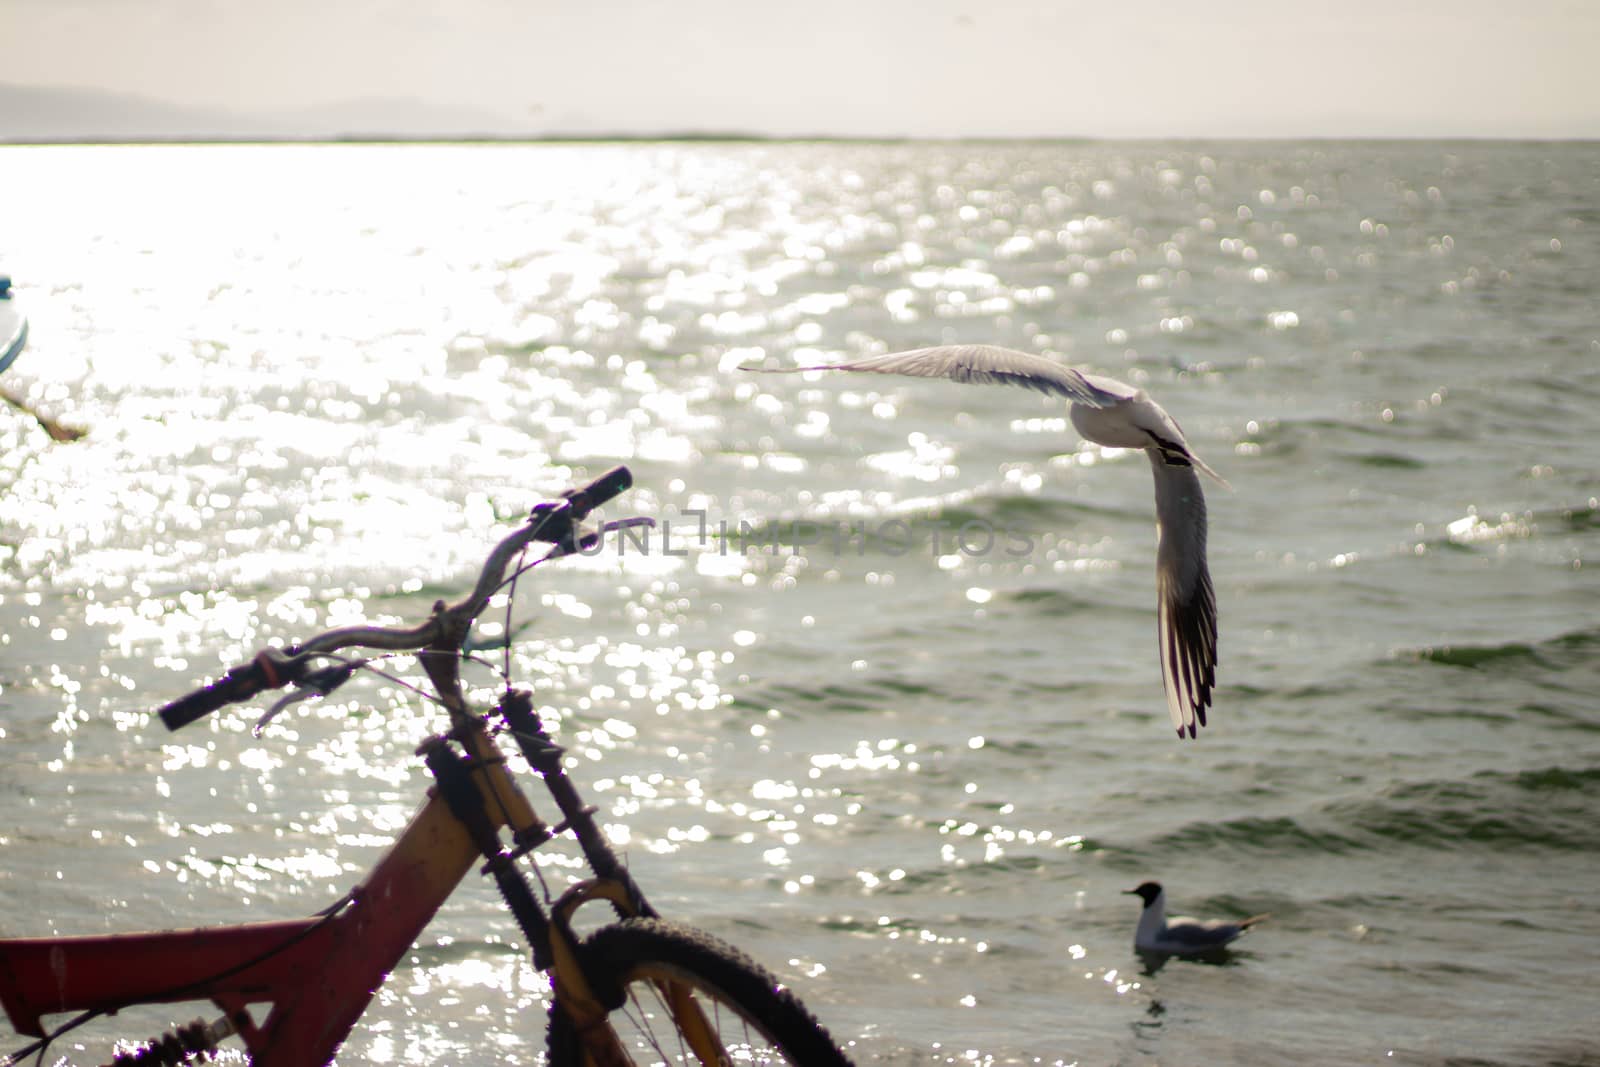 landscape shoot at early sunset with little birds and bicycle. photo has taken at izmir/turkey.